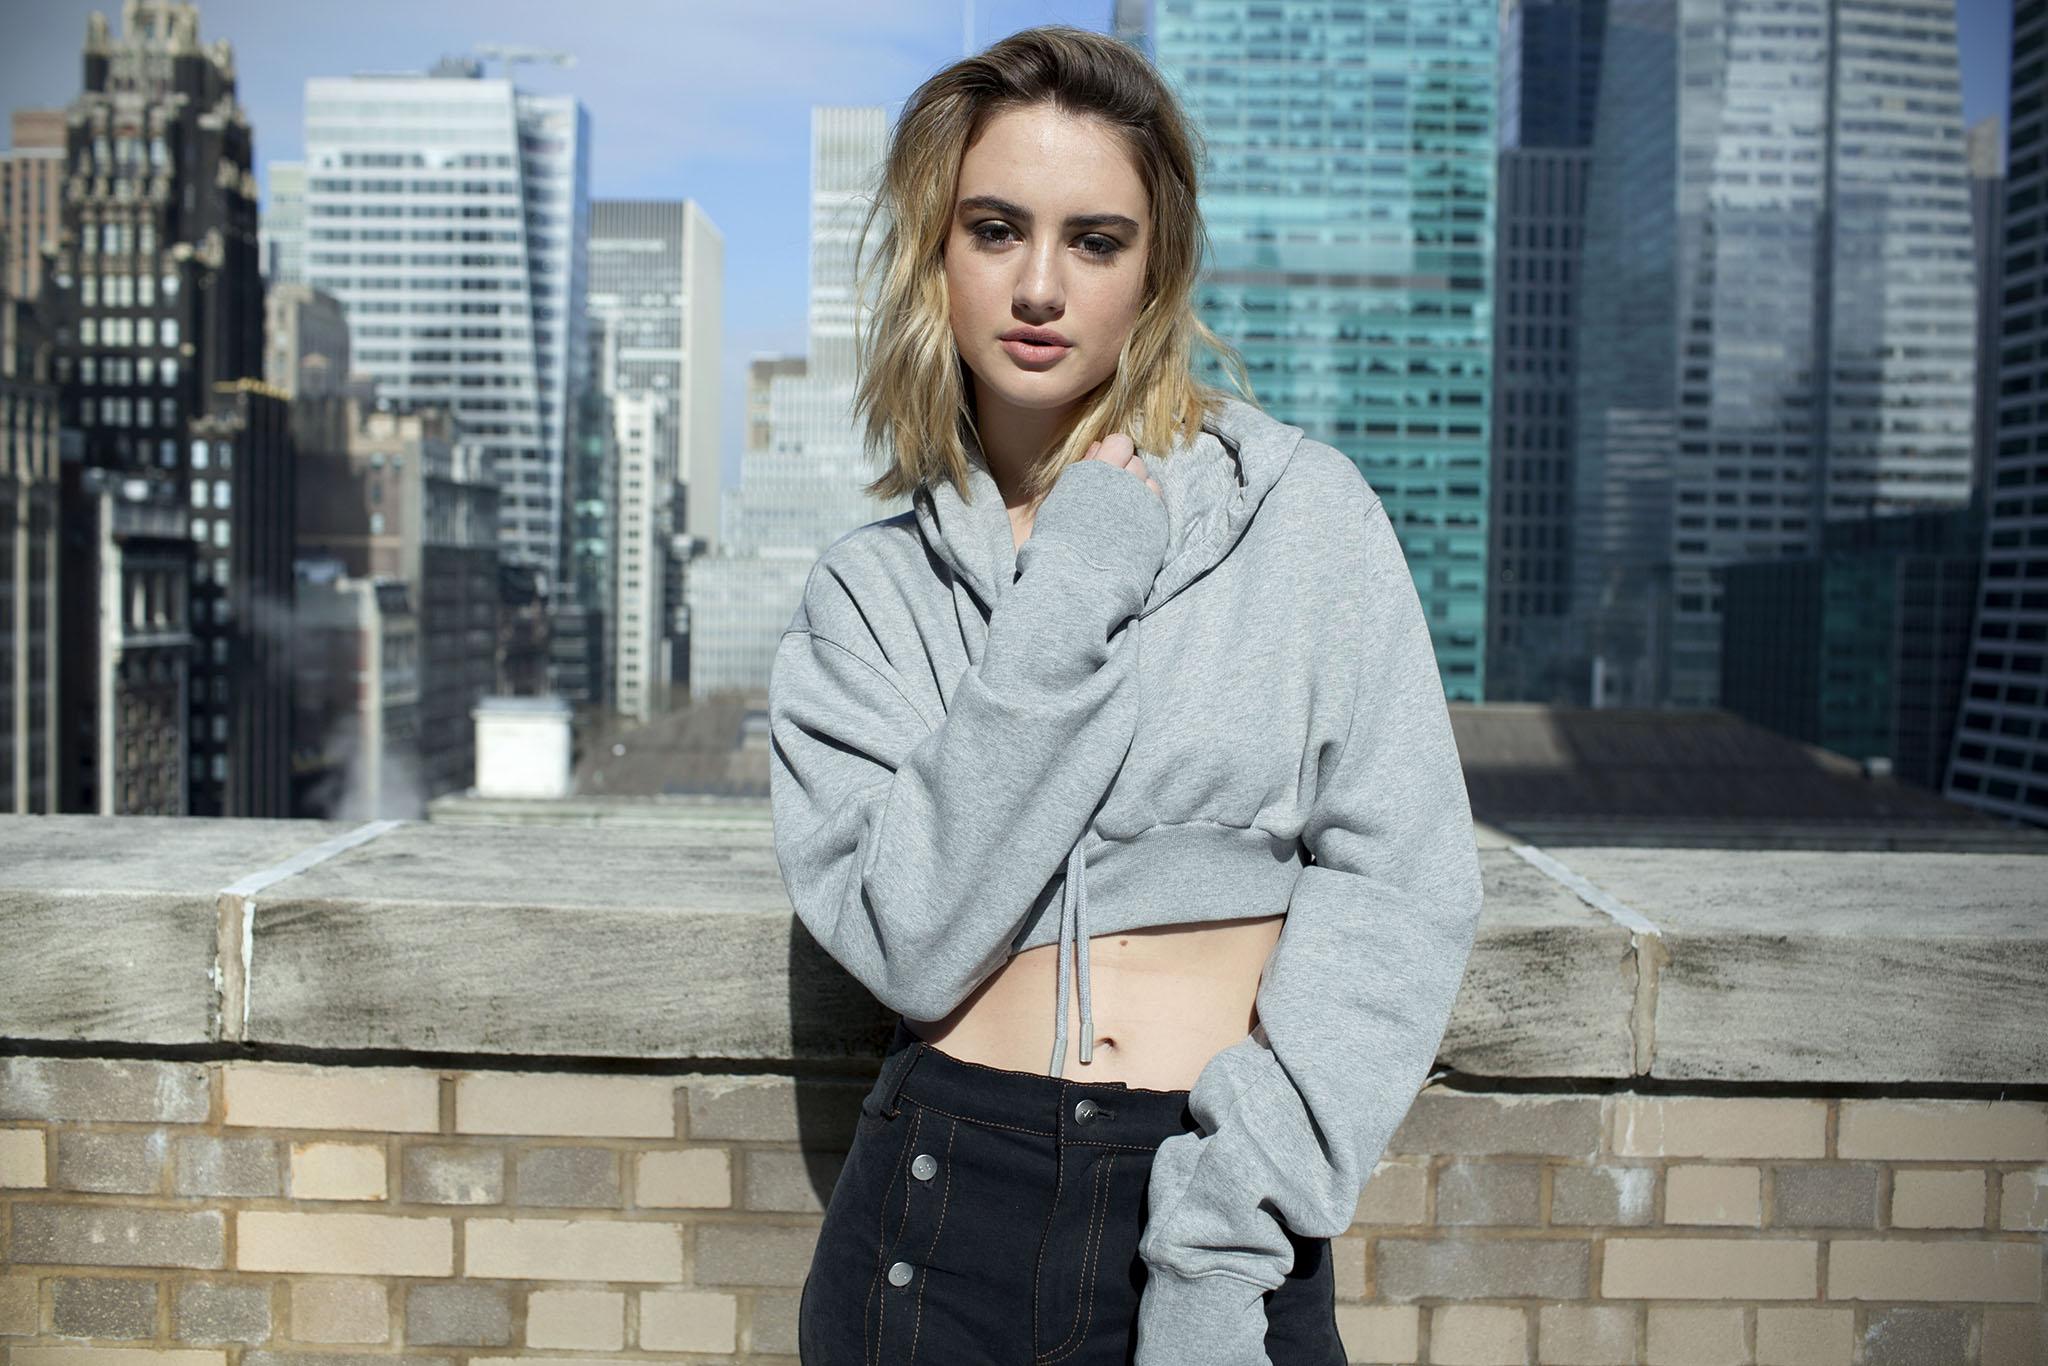 Growing Up Grace Van Patten: 'Tramps, ' and 'The Whirligig'